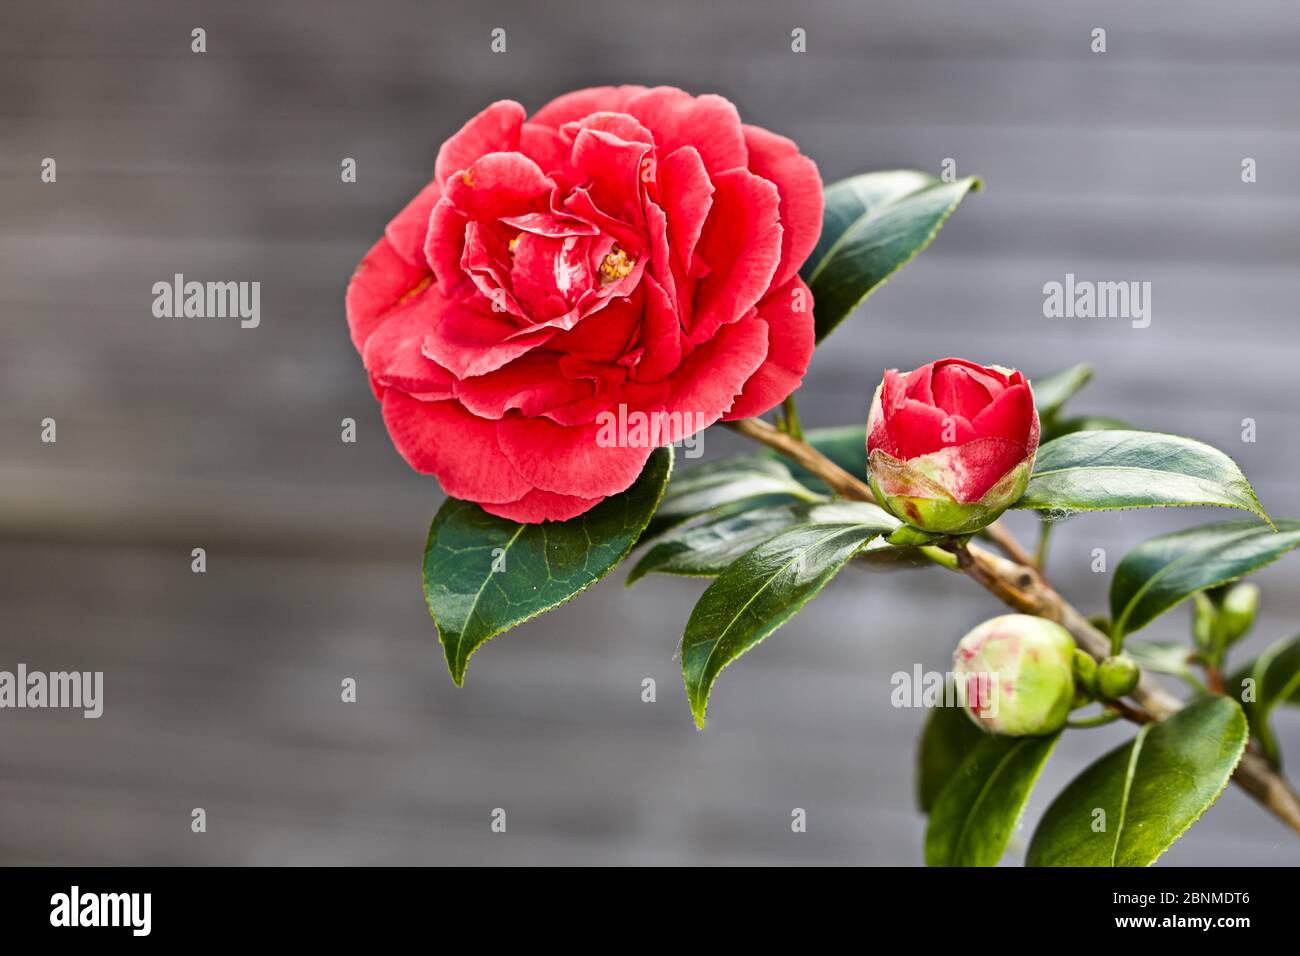 Camellia japonica 'Blood of China' Stock Photo